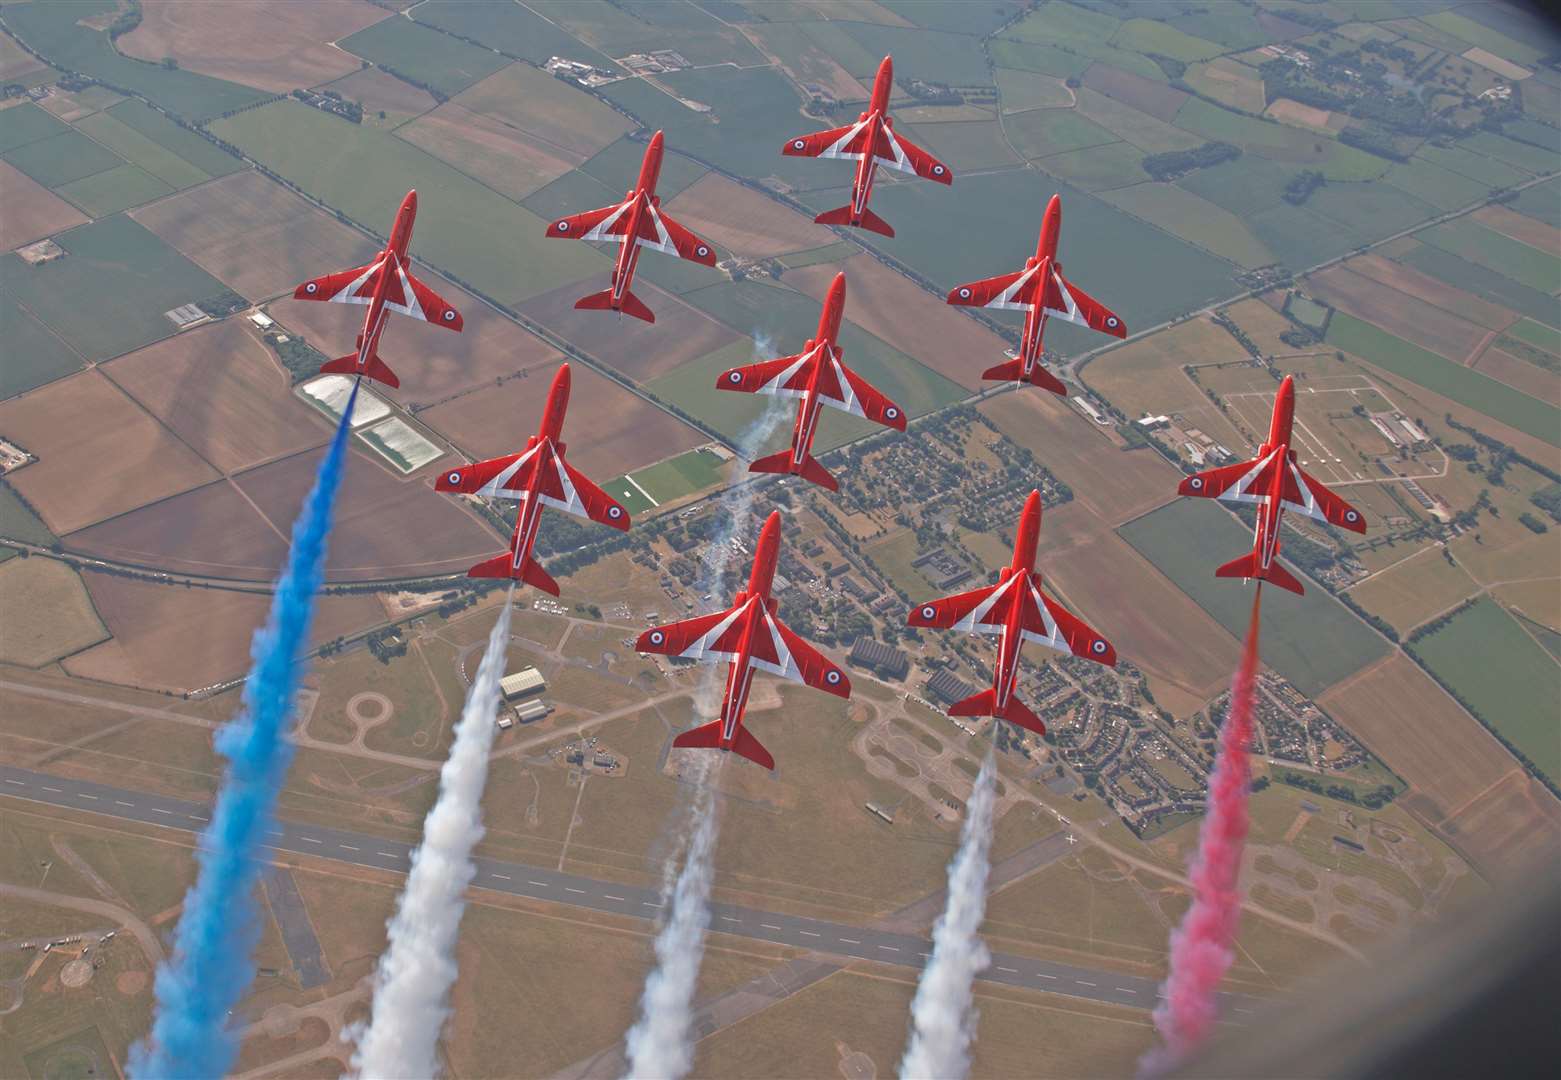 The Red Arrows will hopefully be a fitting finale to the Battle of Britain airshow